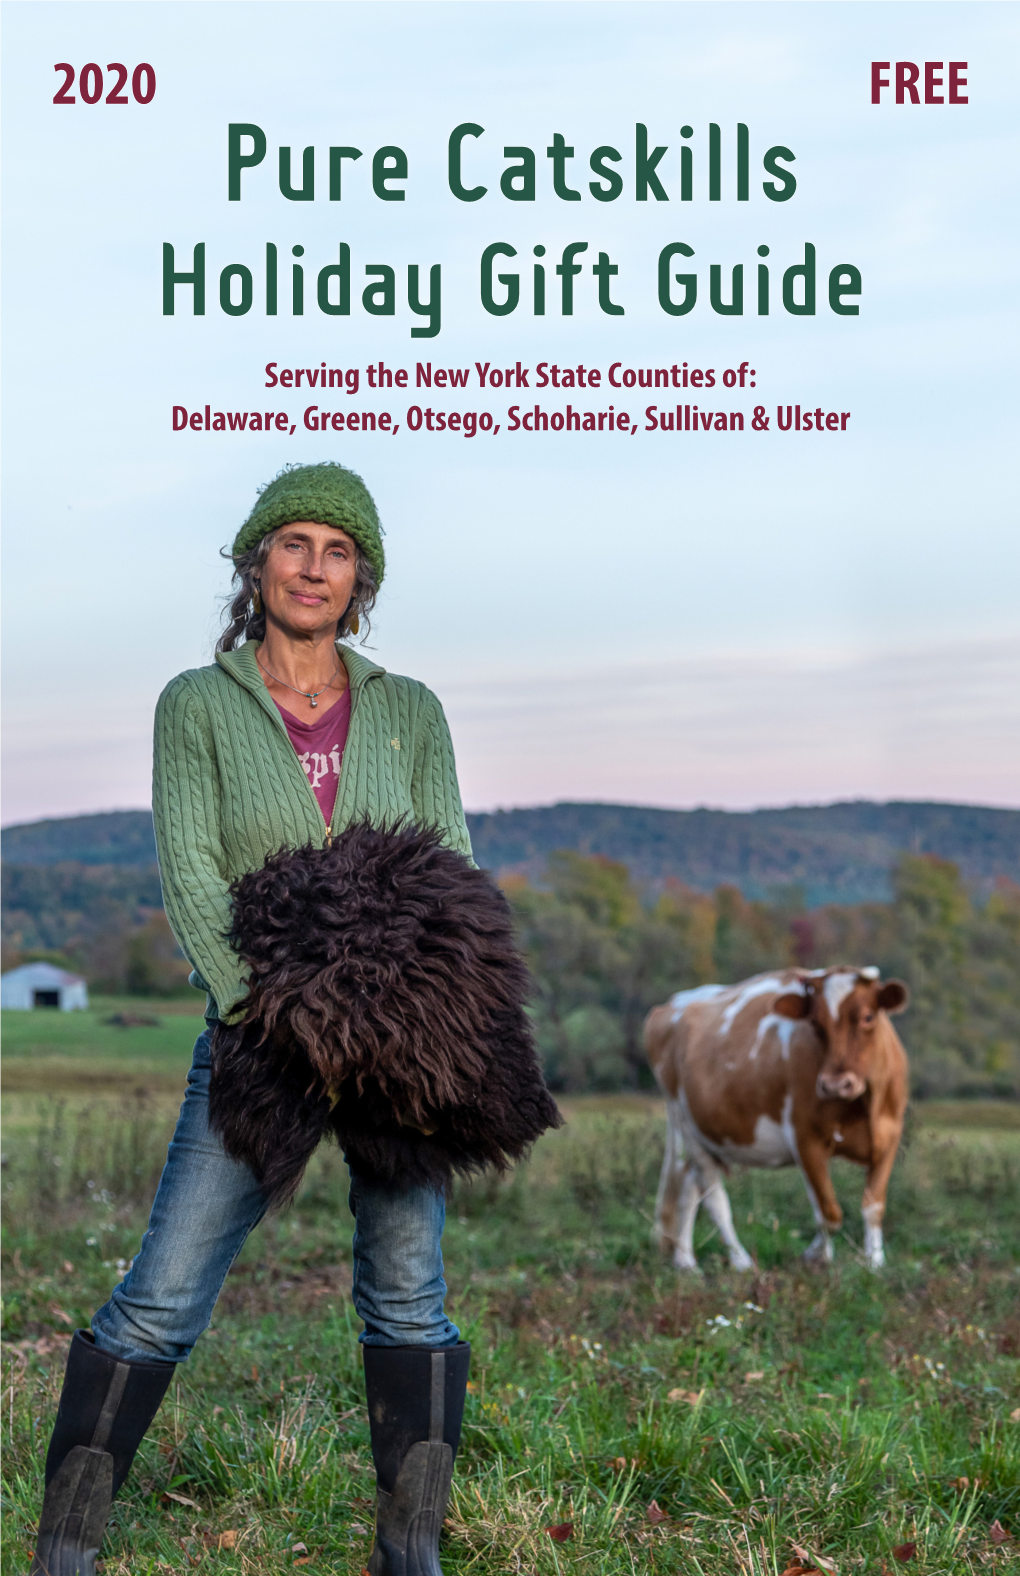 Holiday Gift Guide Serving the New York State Counties Of: Delaware, Greene, Otsego, Schoharie, Sullivan & Ulster Contents